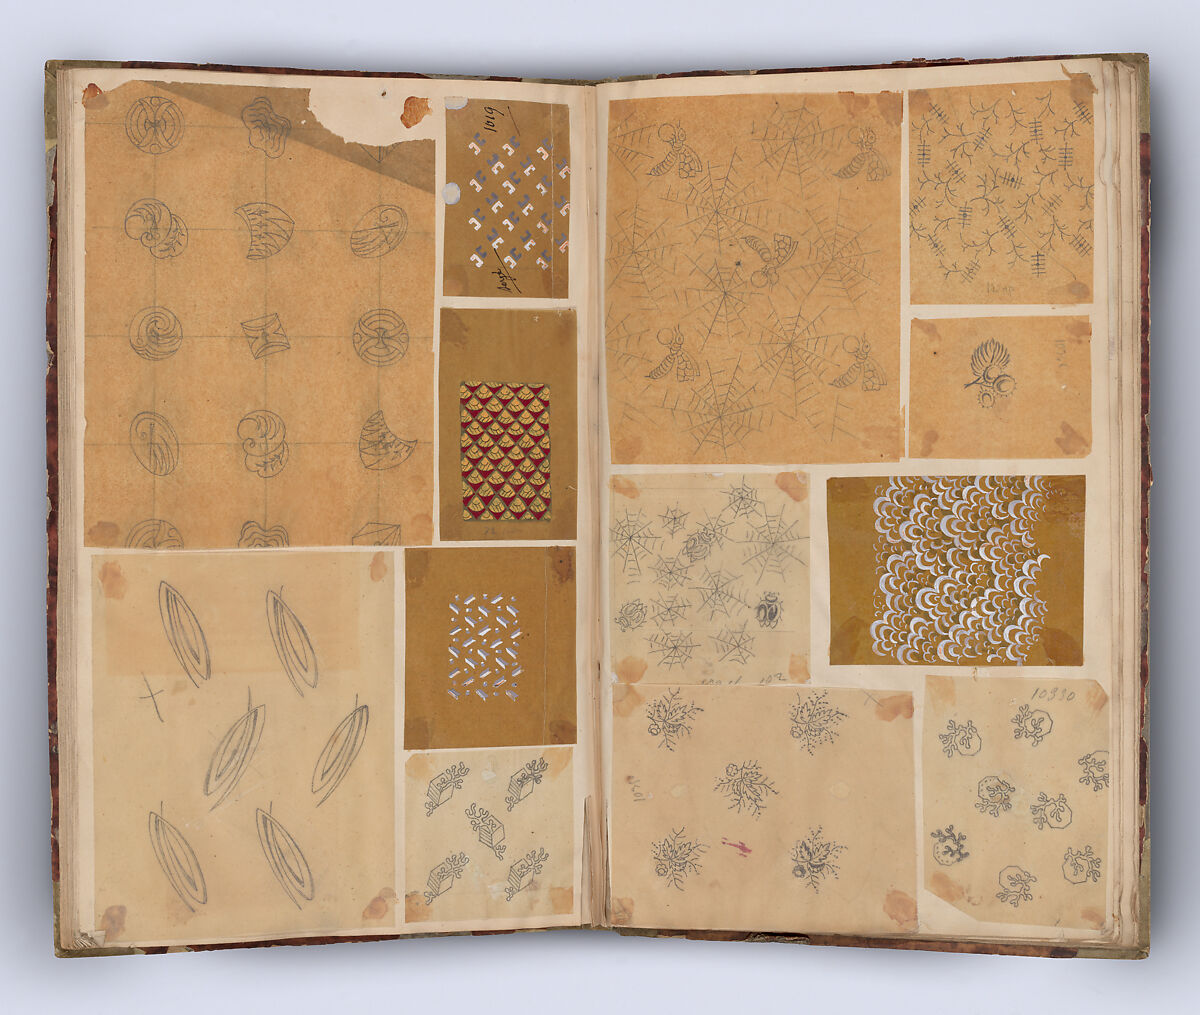 Scrapbook with Textile Patterns on Transfer Paper, Anonymous, French, 19th century, Pen and ink, graphite, and gouache over transfer paper 